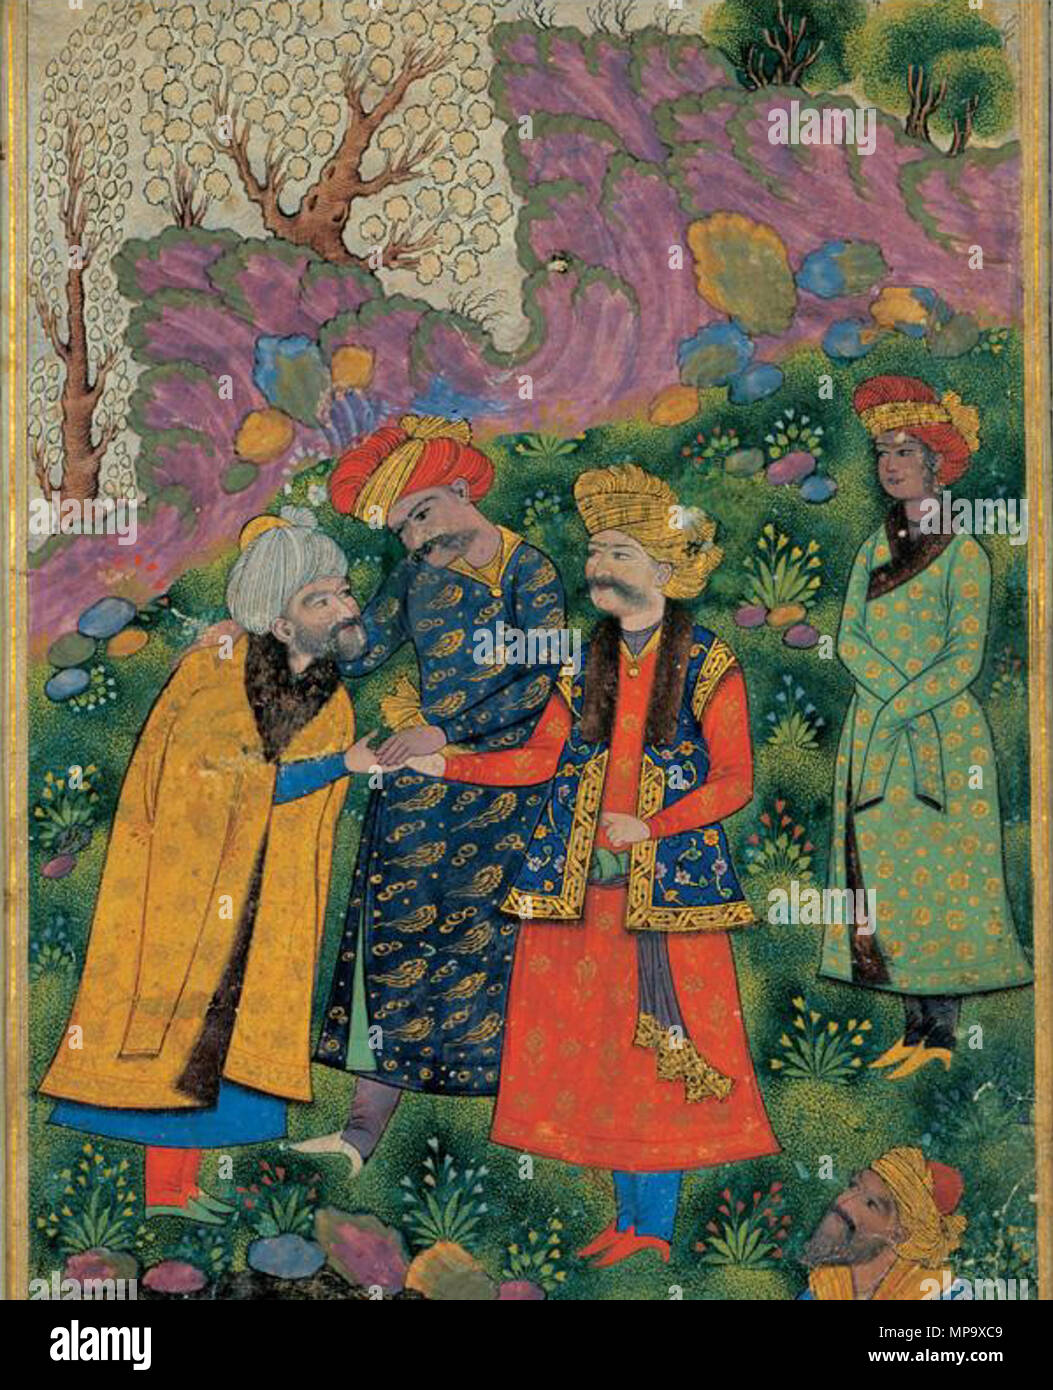 . English: Mahmoud & Ayaz, and Shah Abbas. The Sultan (in red robe) is to the right, shaking the hand of the sheykh, with Ayaz (in green robe) standing behind him. The figure to his right is Shah Abbas I who reigned about 600 years later. 1515. Assigned to Kamaleddin Behzad 845 Mahmud and Ayaz and Shah Abbas I Stock Photo